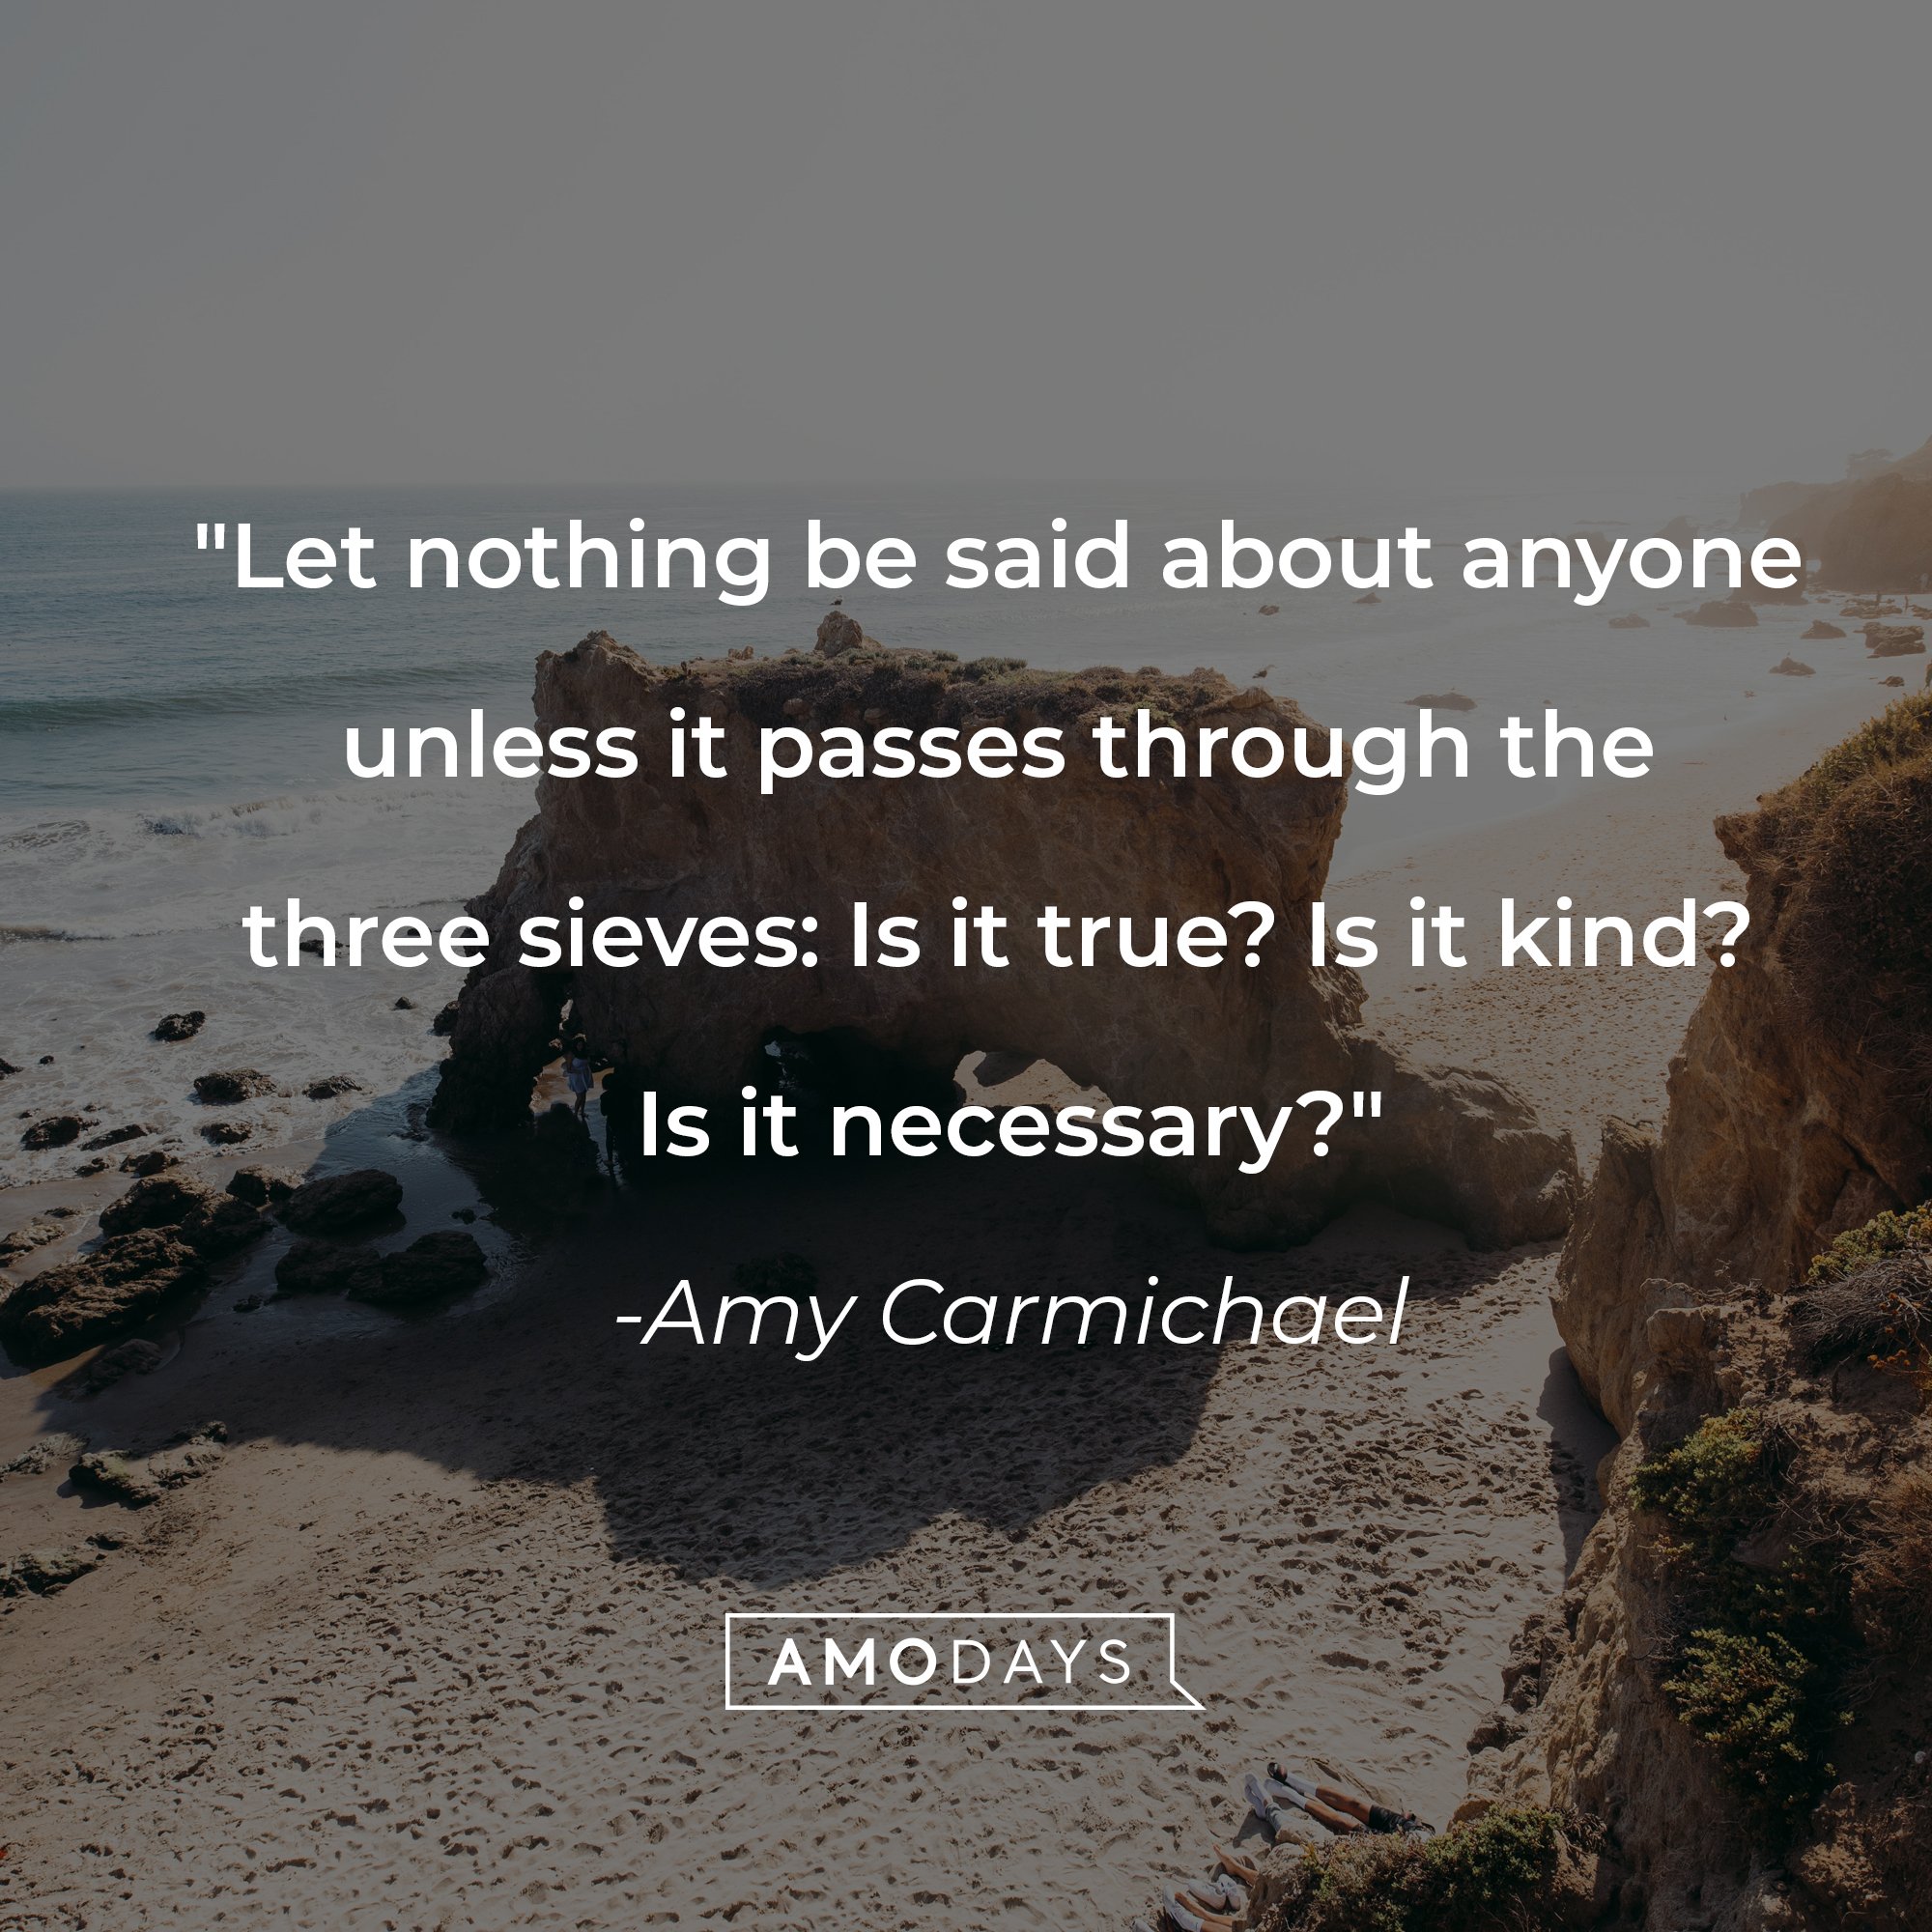 Amy Carmichael's quote: "Let nothing be said about anyone unless it passes through the three sieves: Is it true? Is it kind? Is it necessary?" | Image: AmoDays